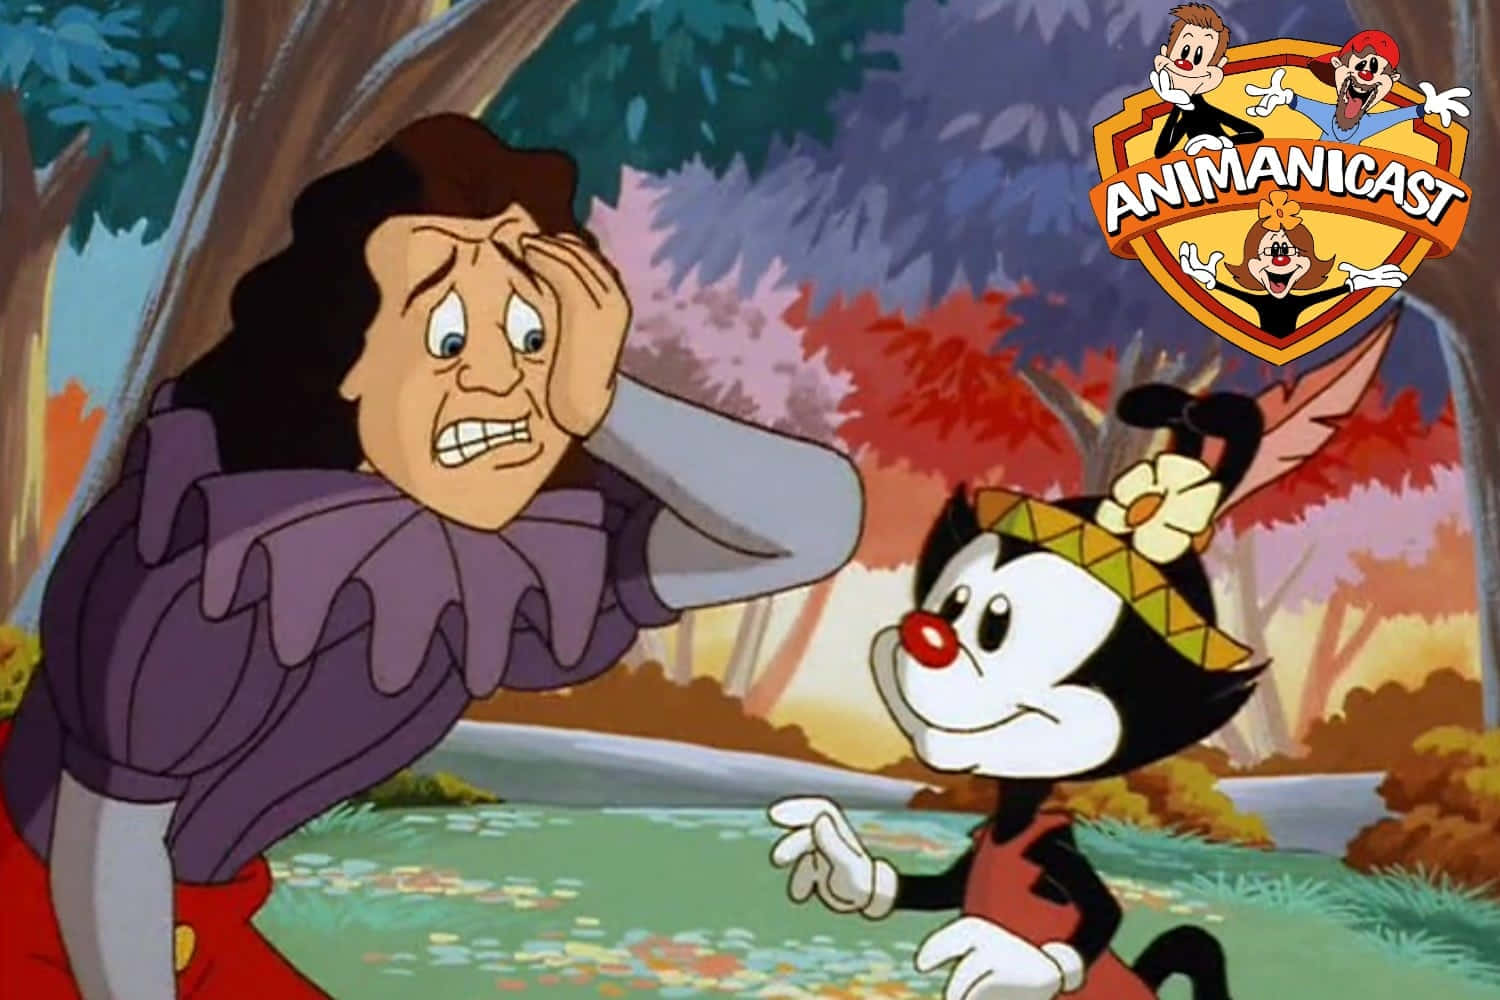 The Animaniacs Living Out Their Catchphrase: "Up to Wakko's Wacky World"